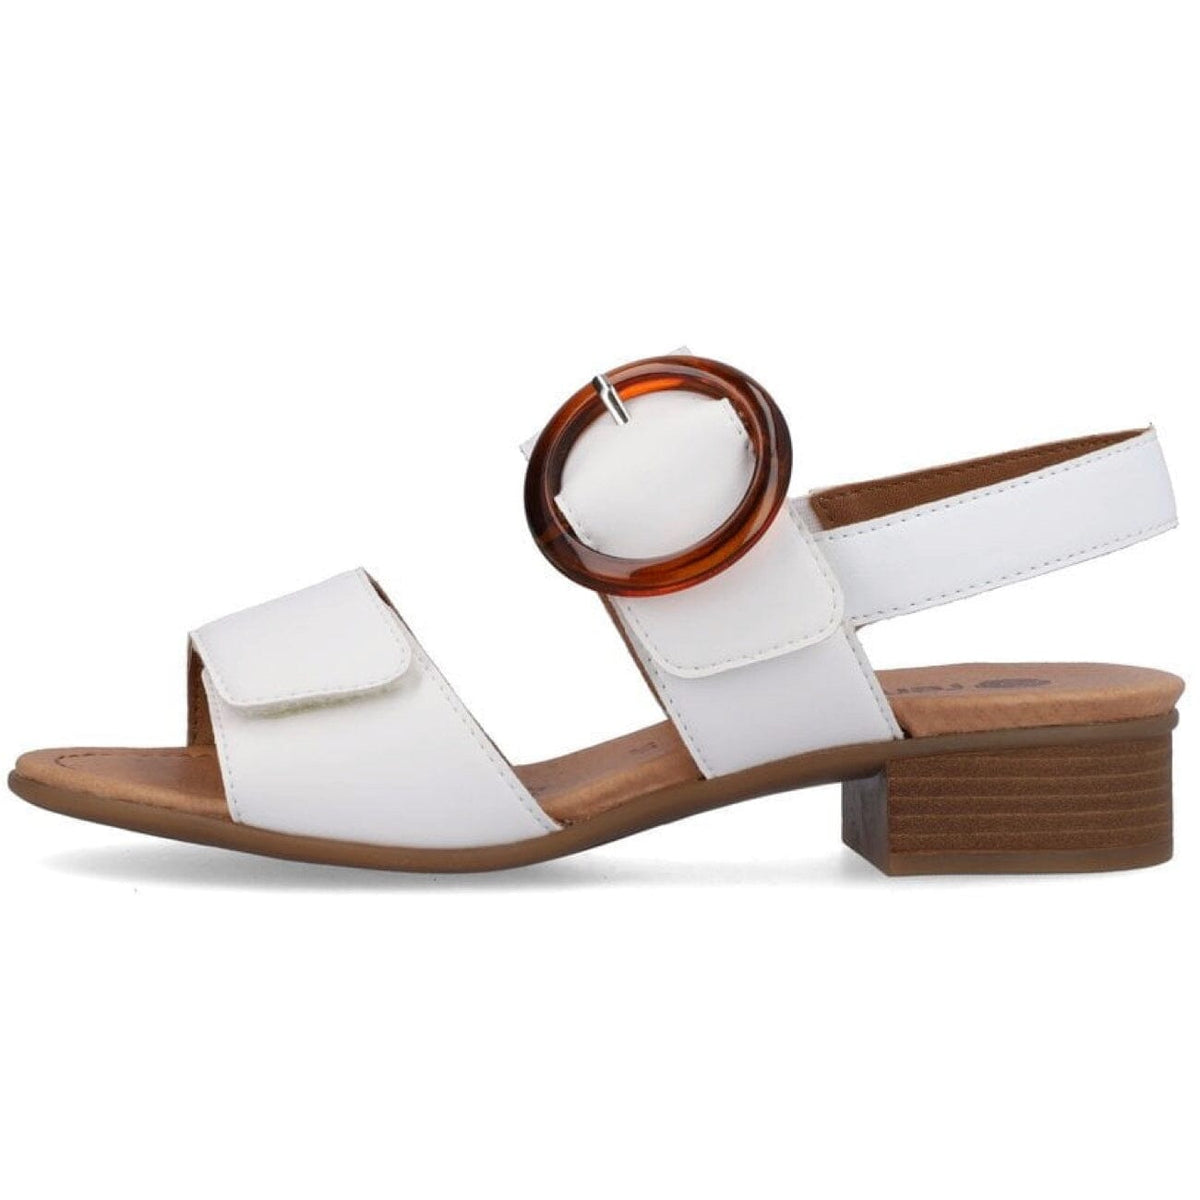 Remonte, Weiss Sandal, Leather, White/Weiss Sandals Remonte 